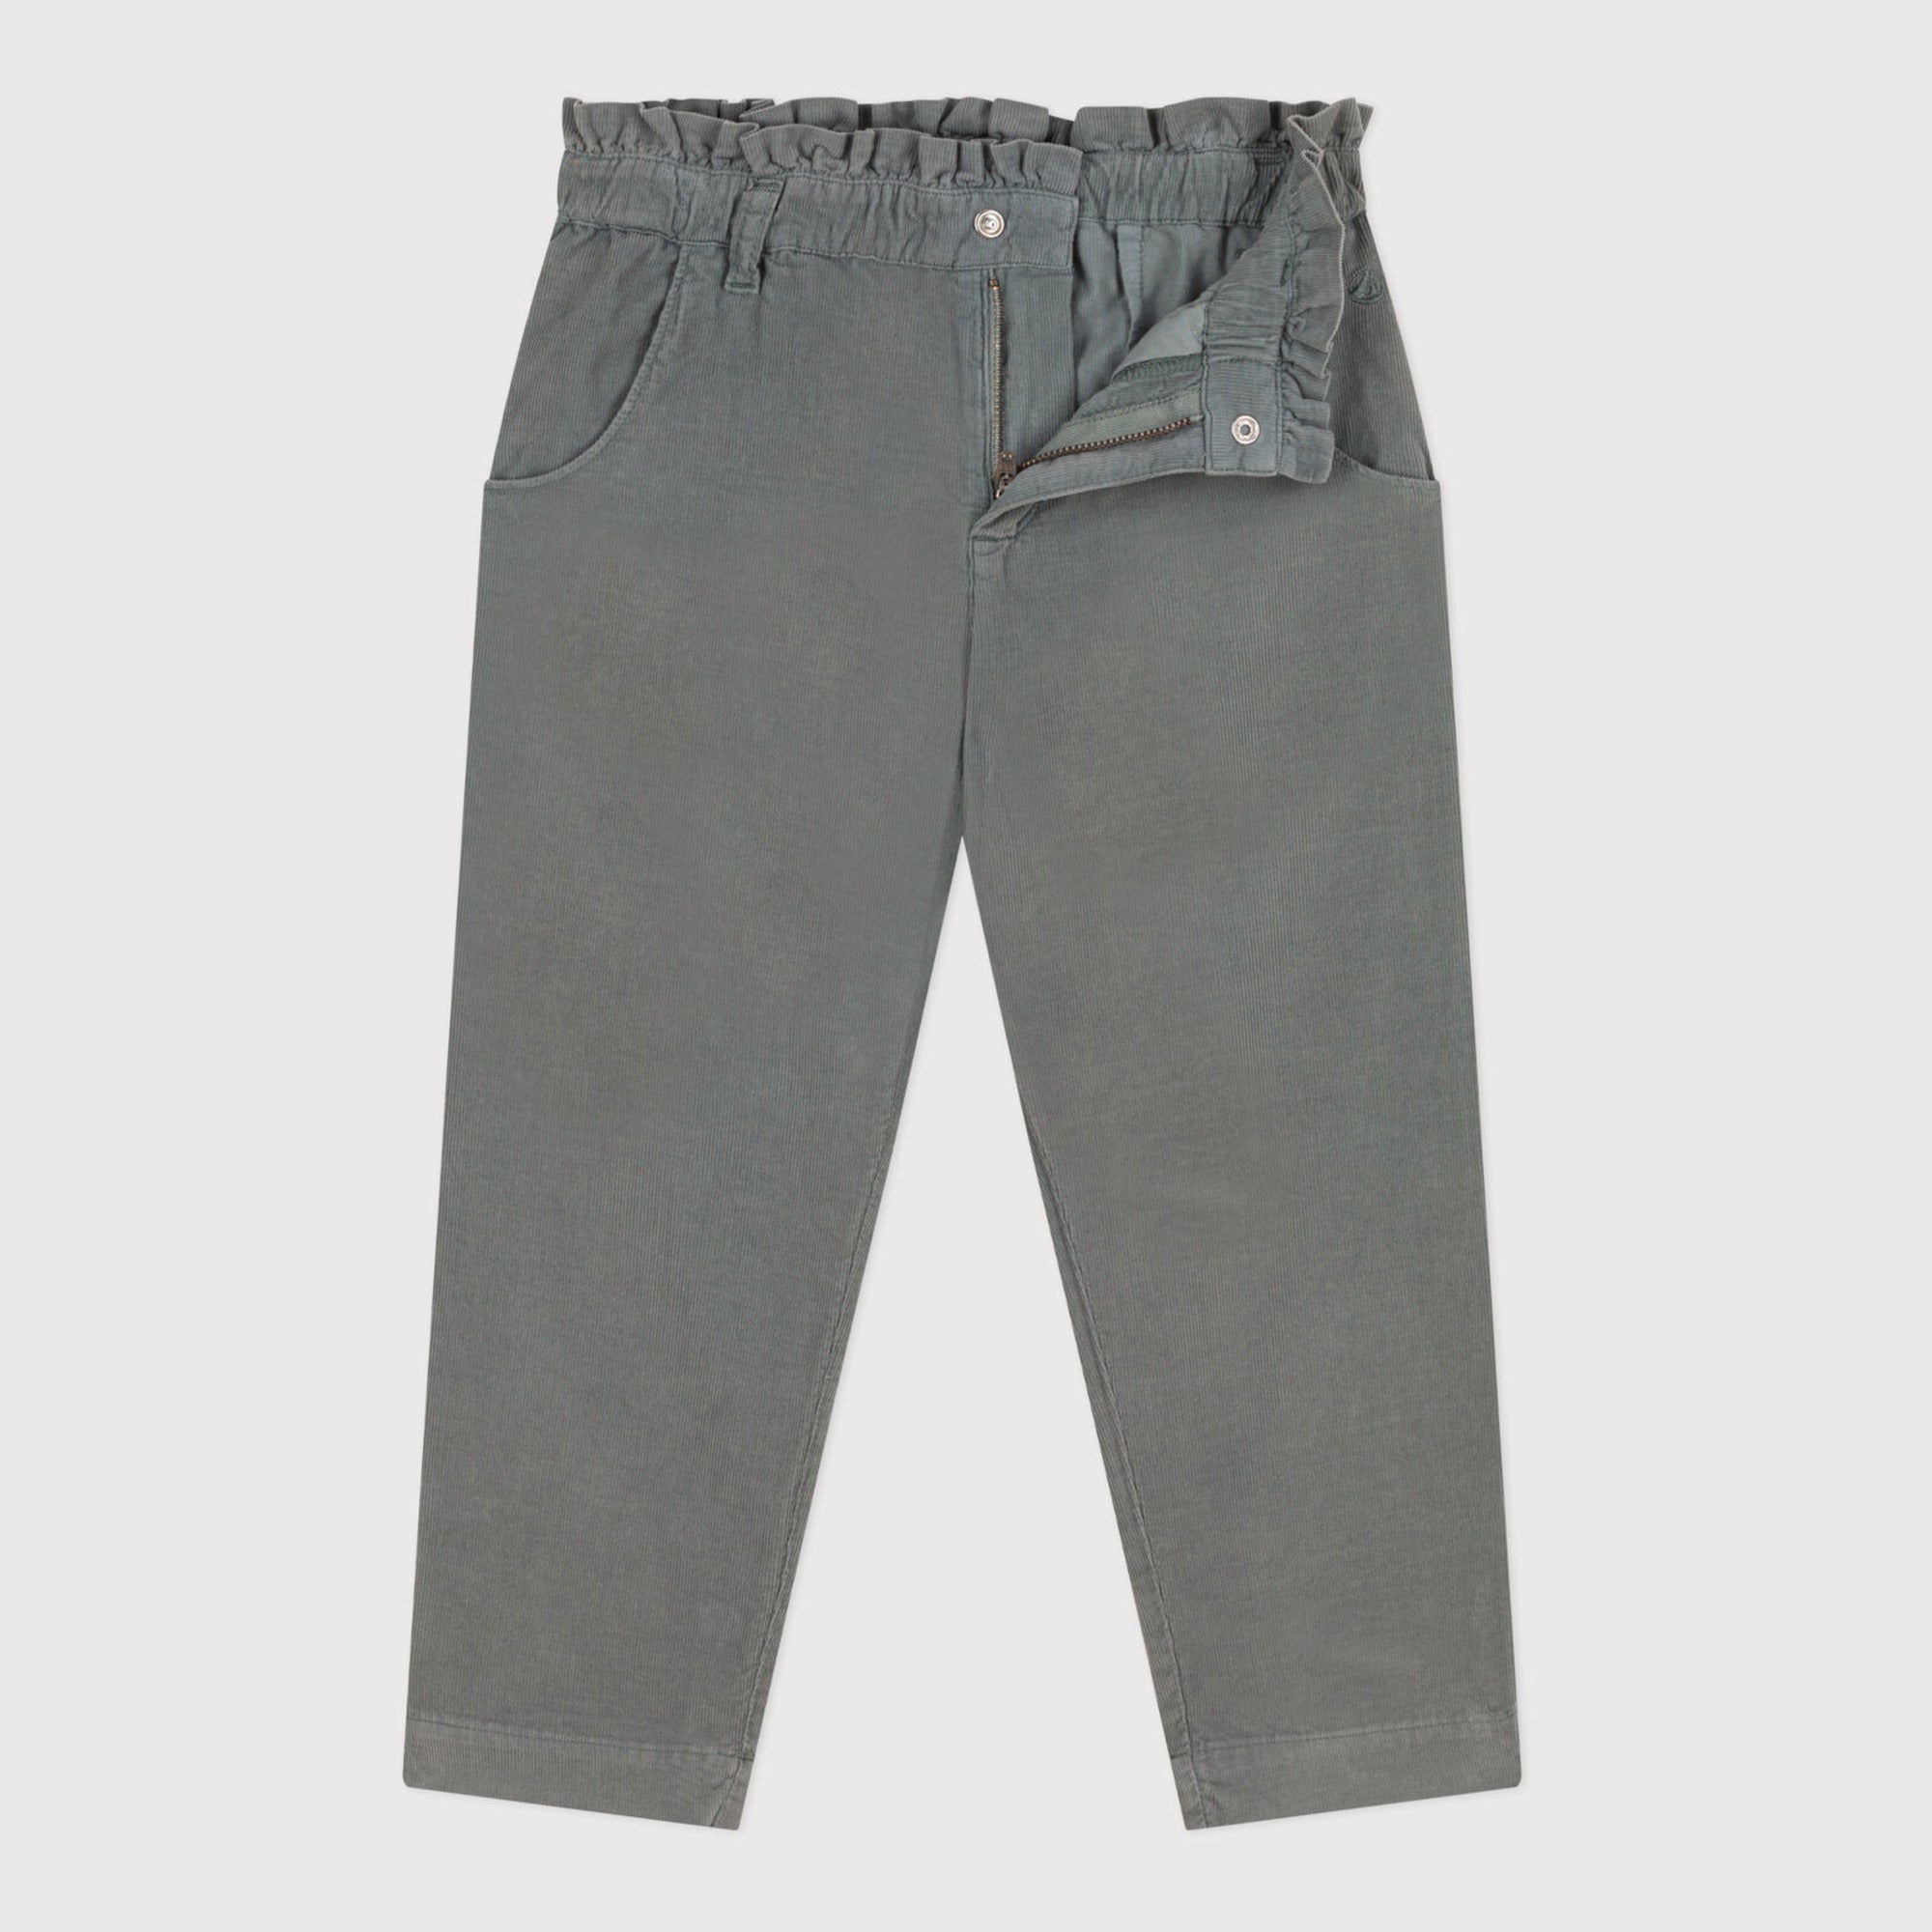 Girls Grey Cotton Trousers